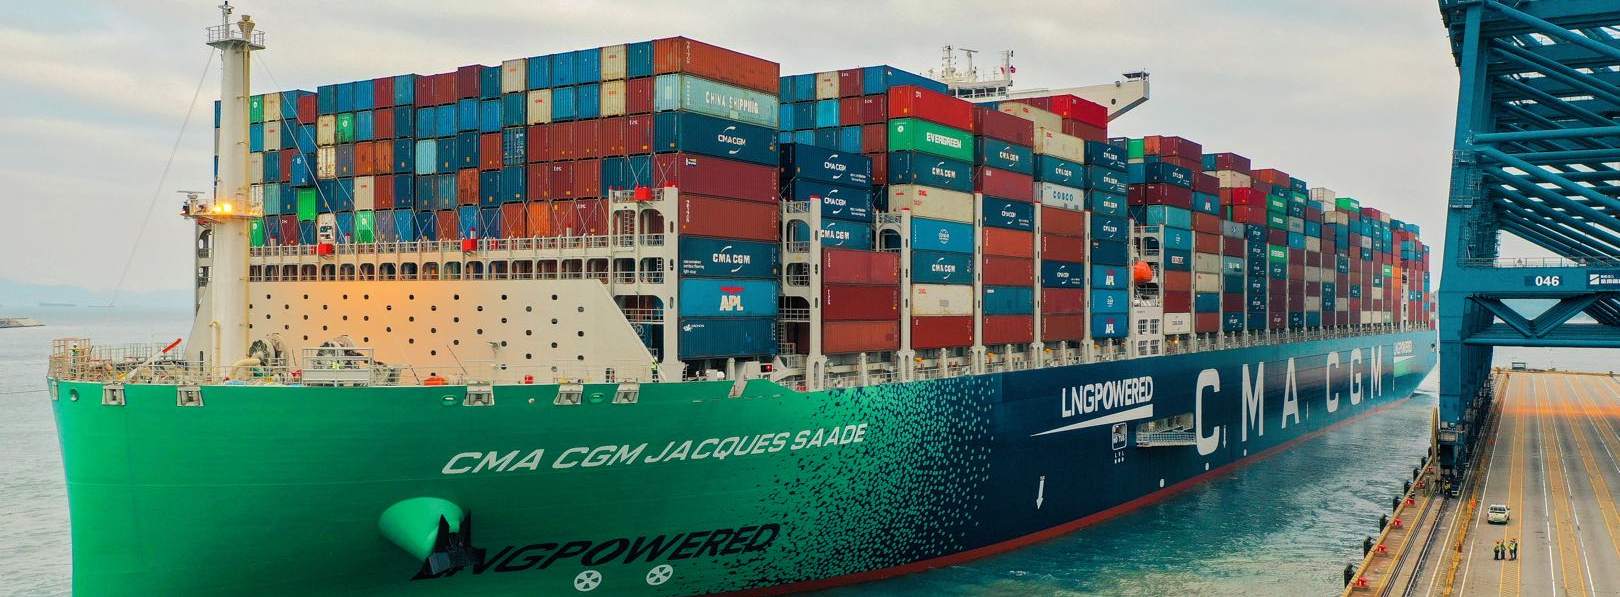 CMA CGM Jacques Saadé sets new world record in Singapore 1